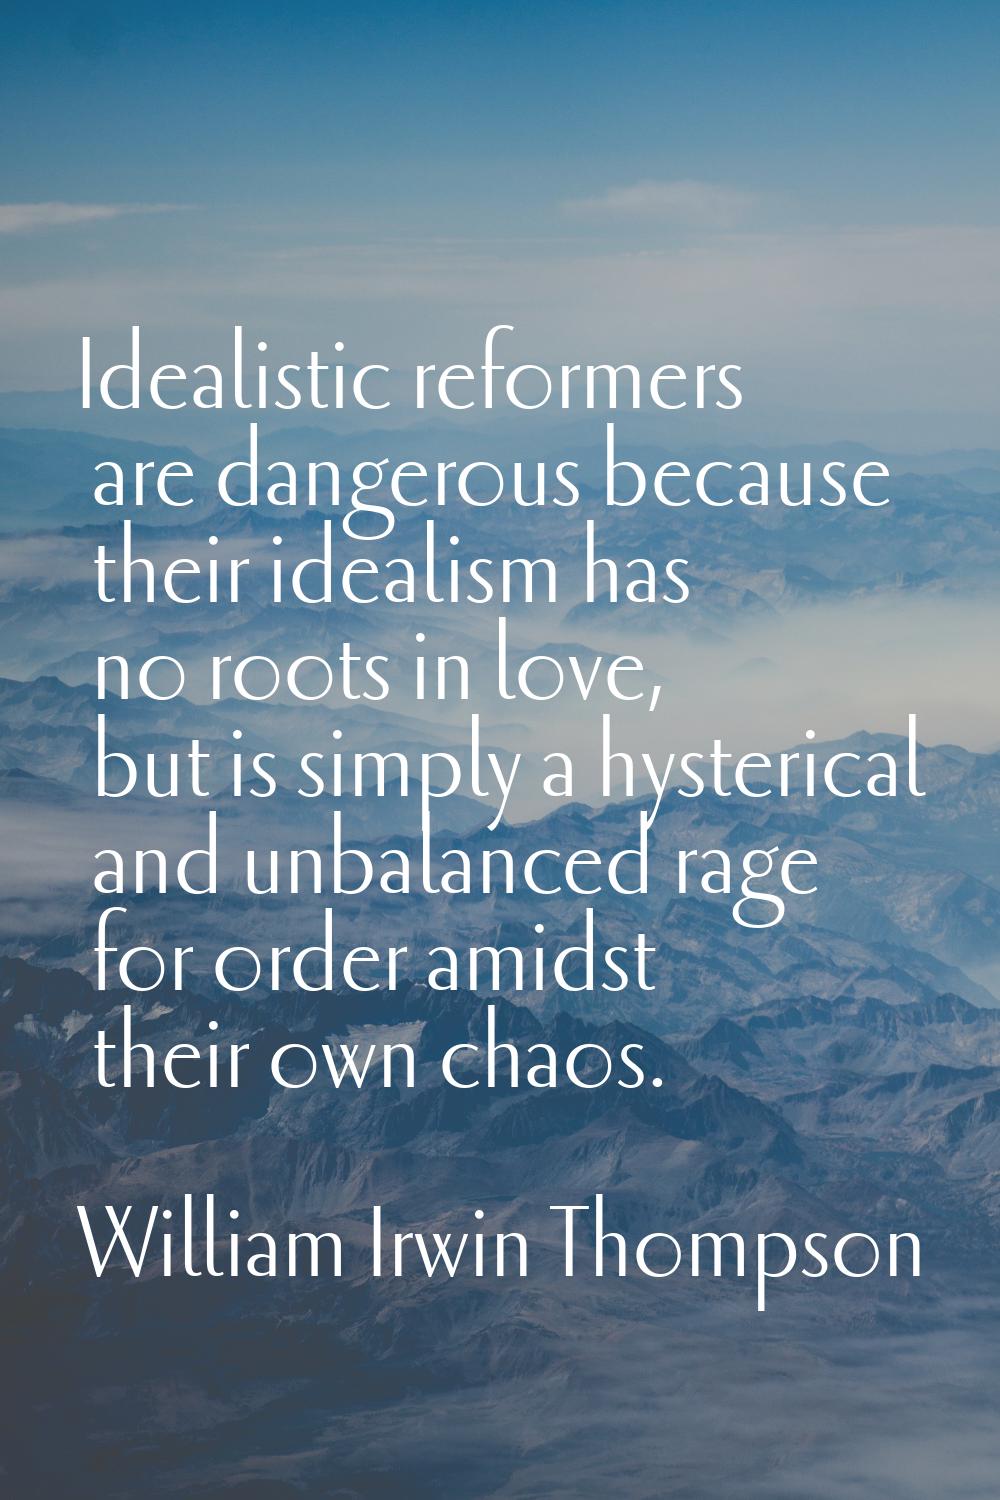 Idealistic reformers are dangerous because their idealism has no roots in love, but is simply a hys